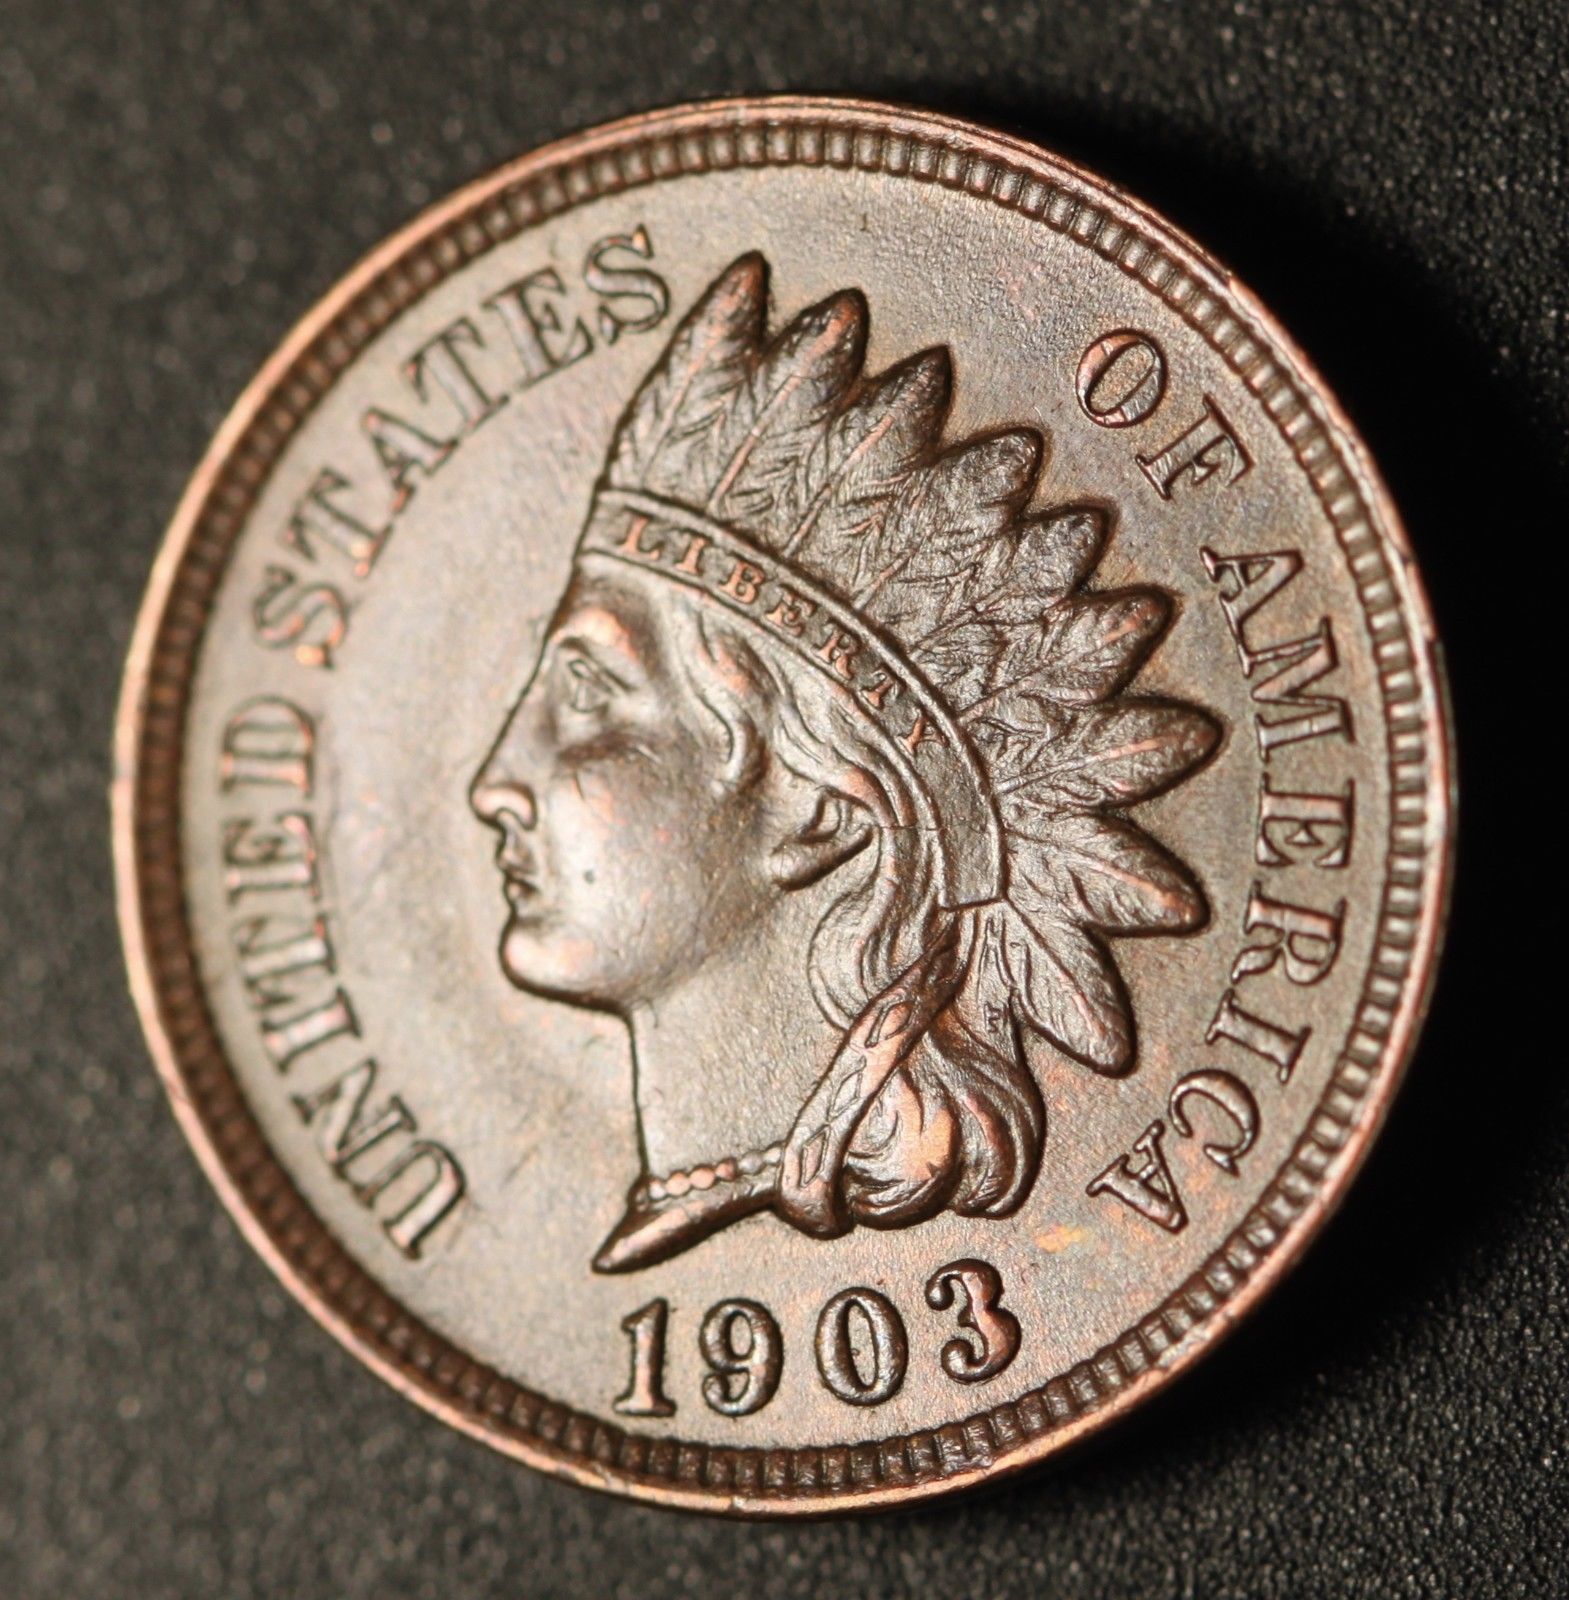 1903 RPD-005 - Indian Head Penny - Photo by Ed Nathanson